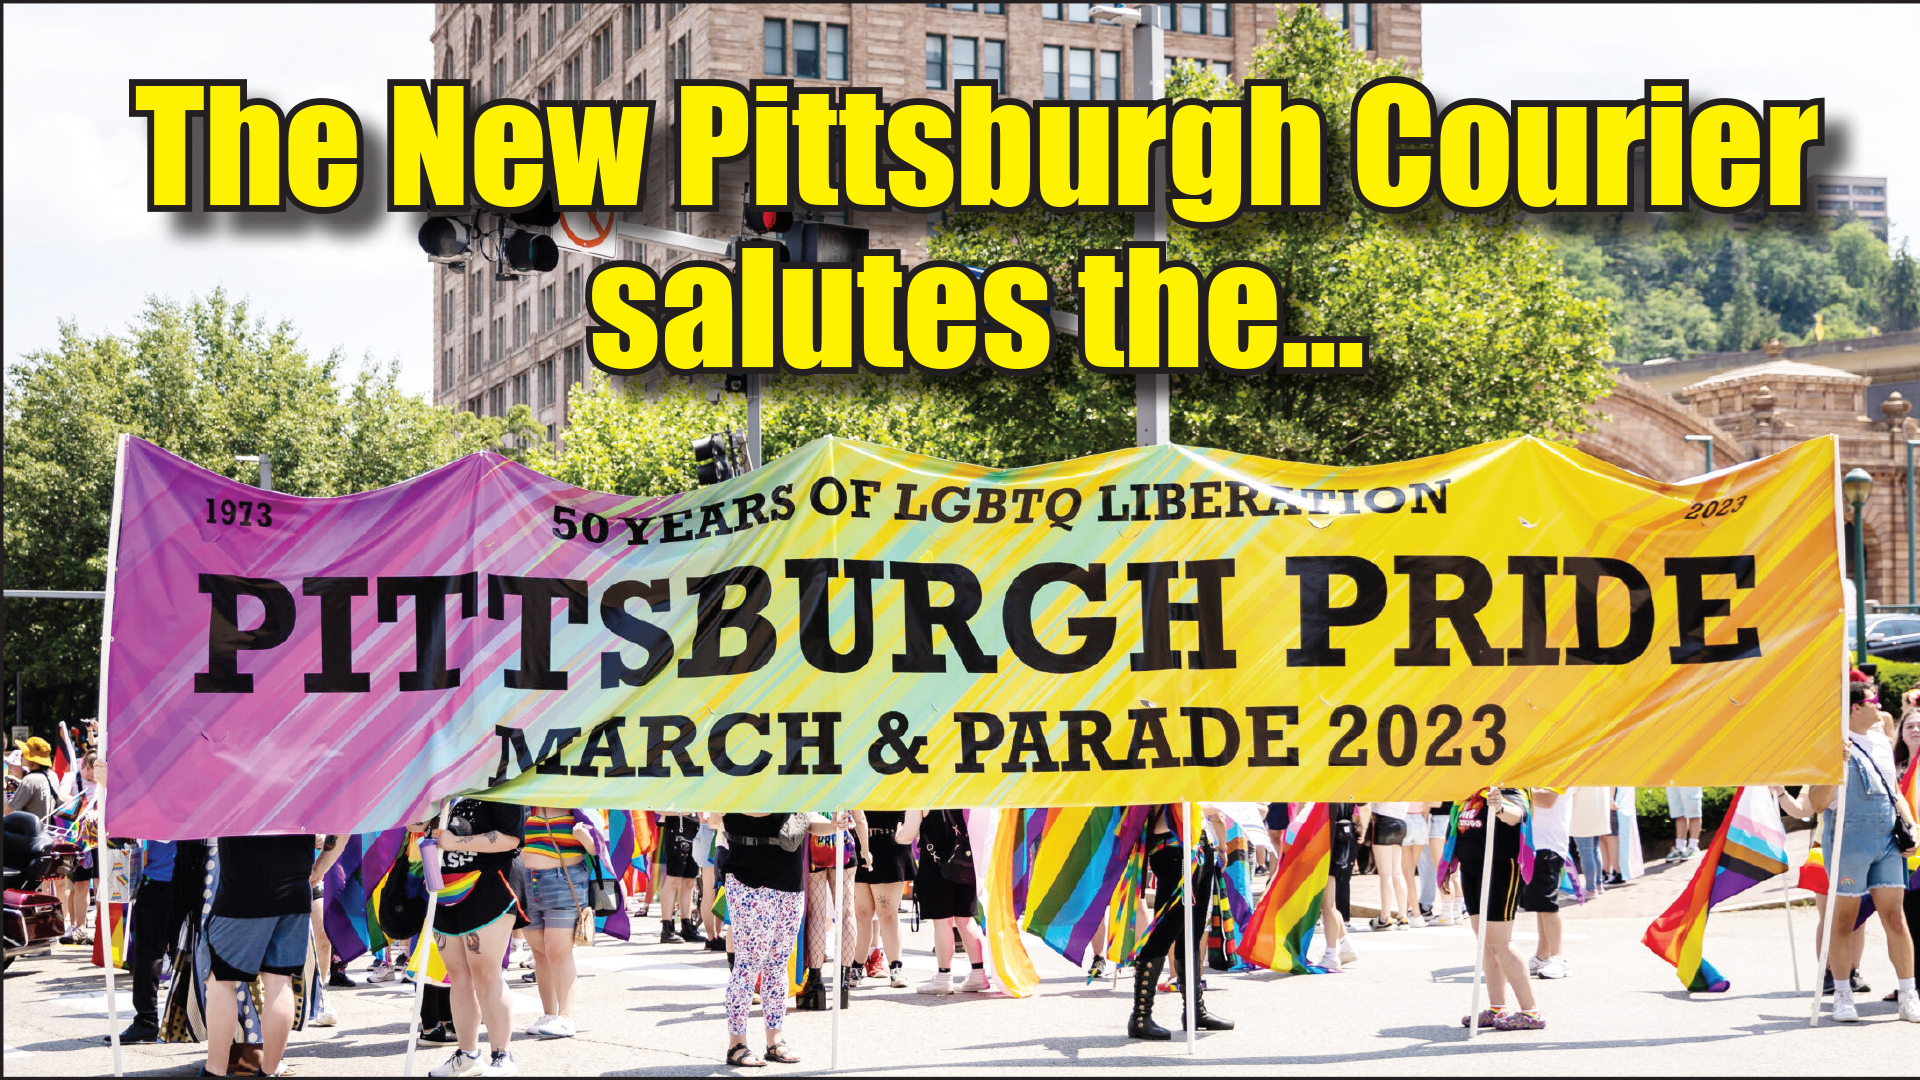 Pittsburgh Pride March and Parade 2023 New Pittsburgh Courier